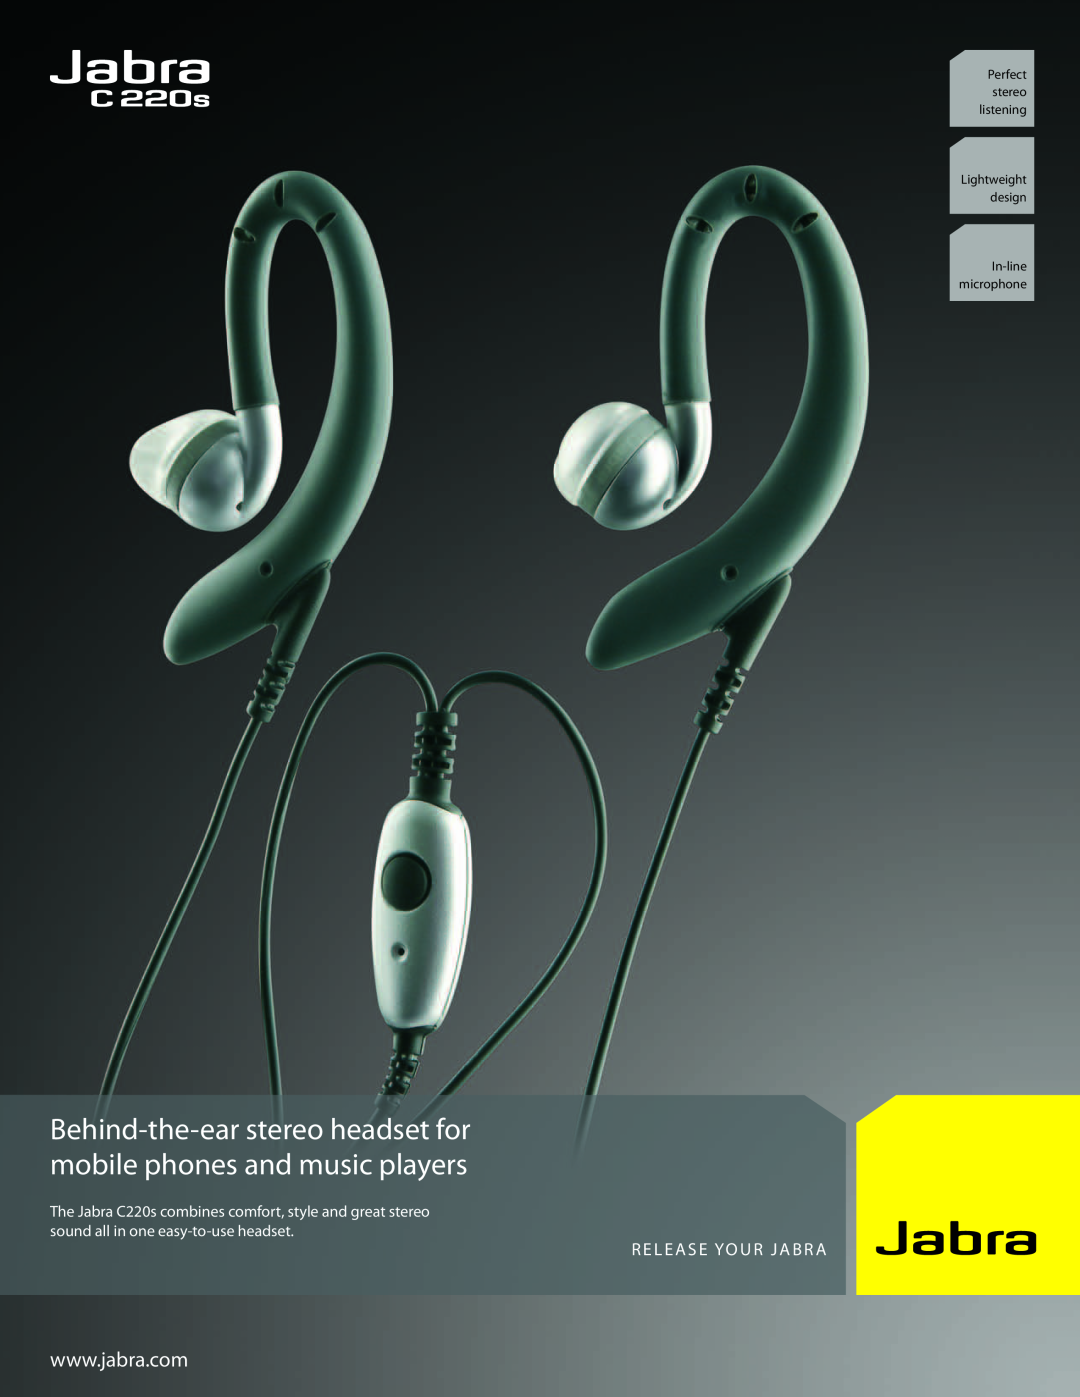 Jabra C220s manual R E L E A S E Yo U R J A B R A, Lightweight design In-linemicrophone, Perfect stereo listening 